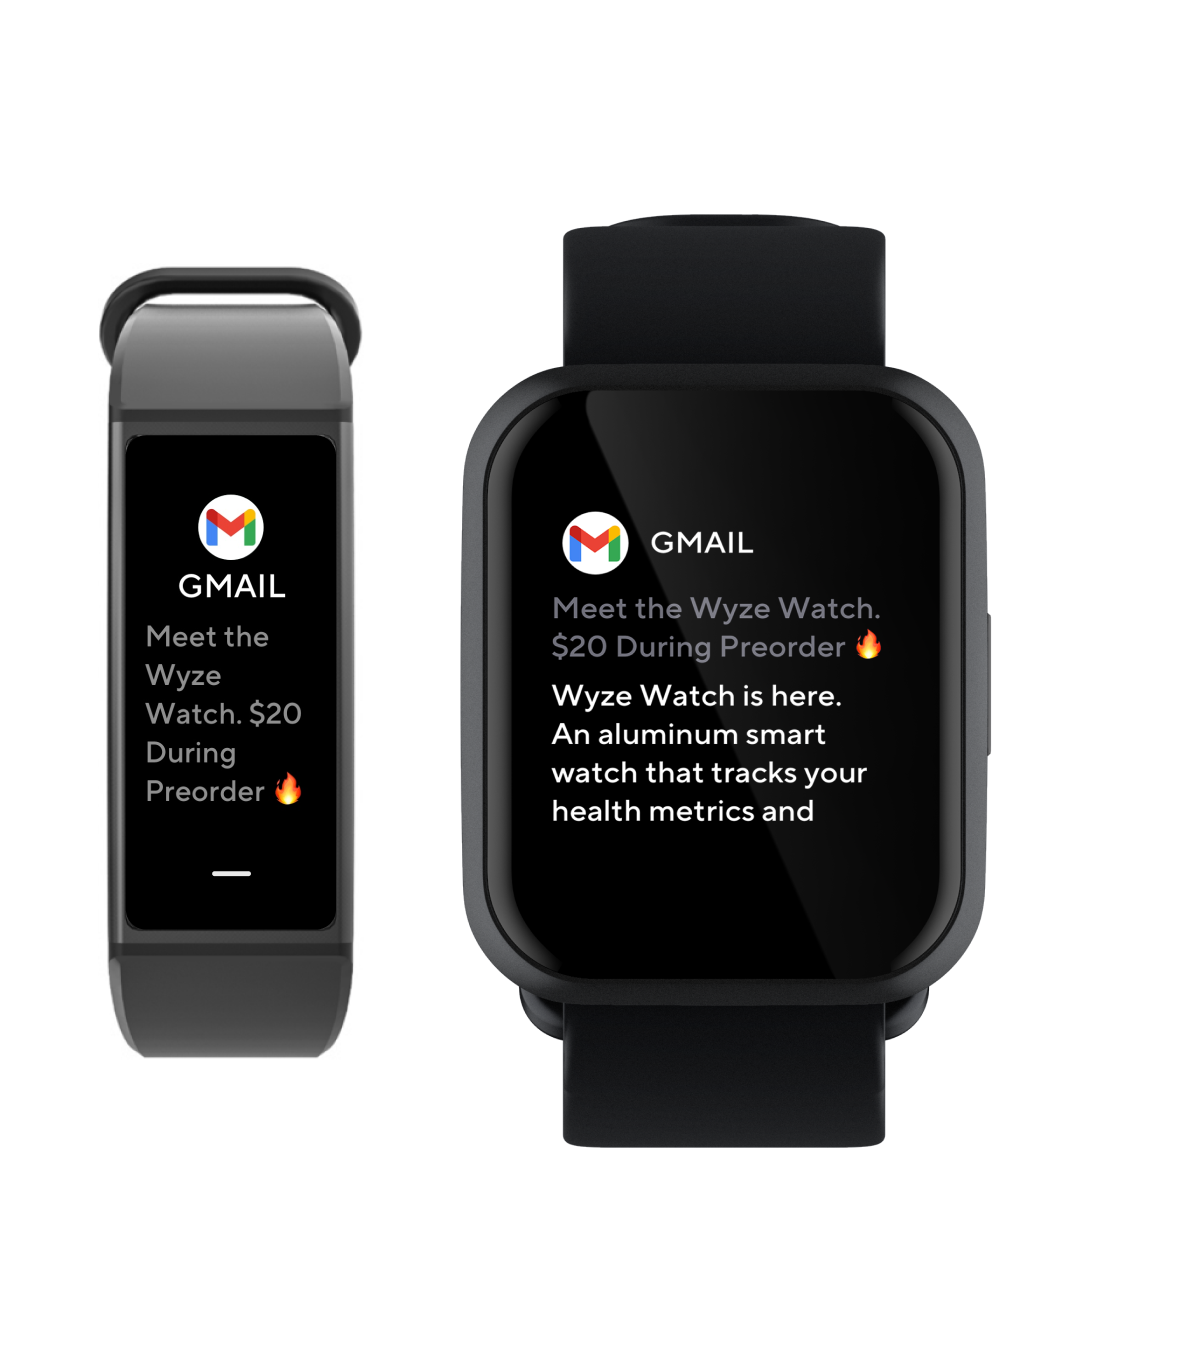 Wyze band and watch showing emails on screen